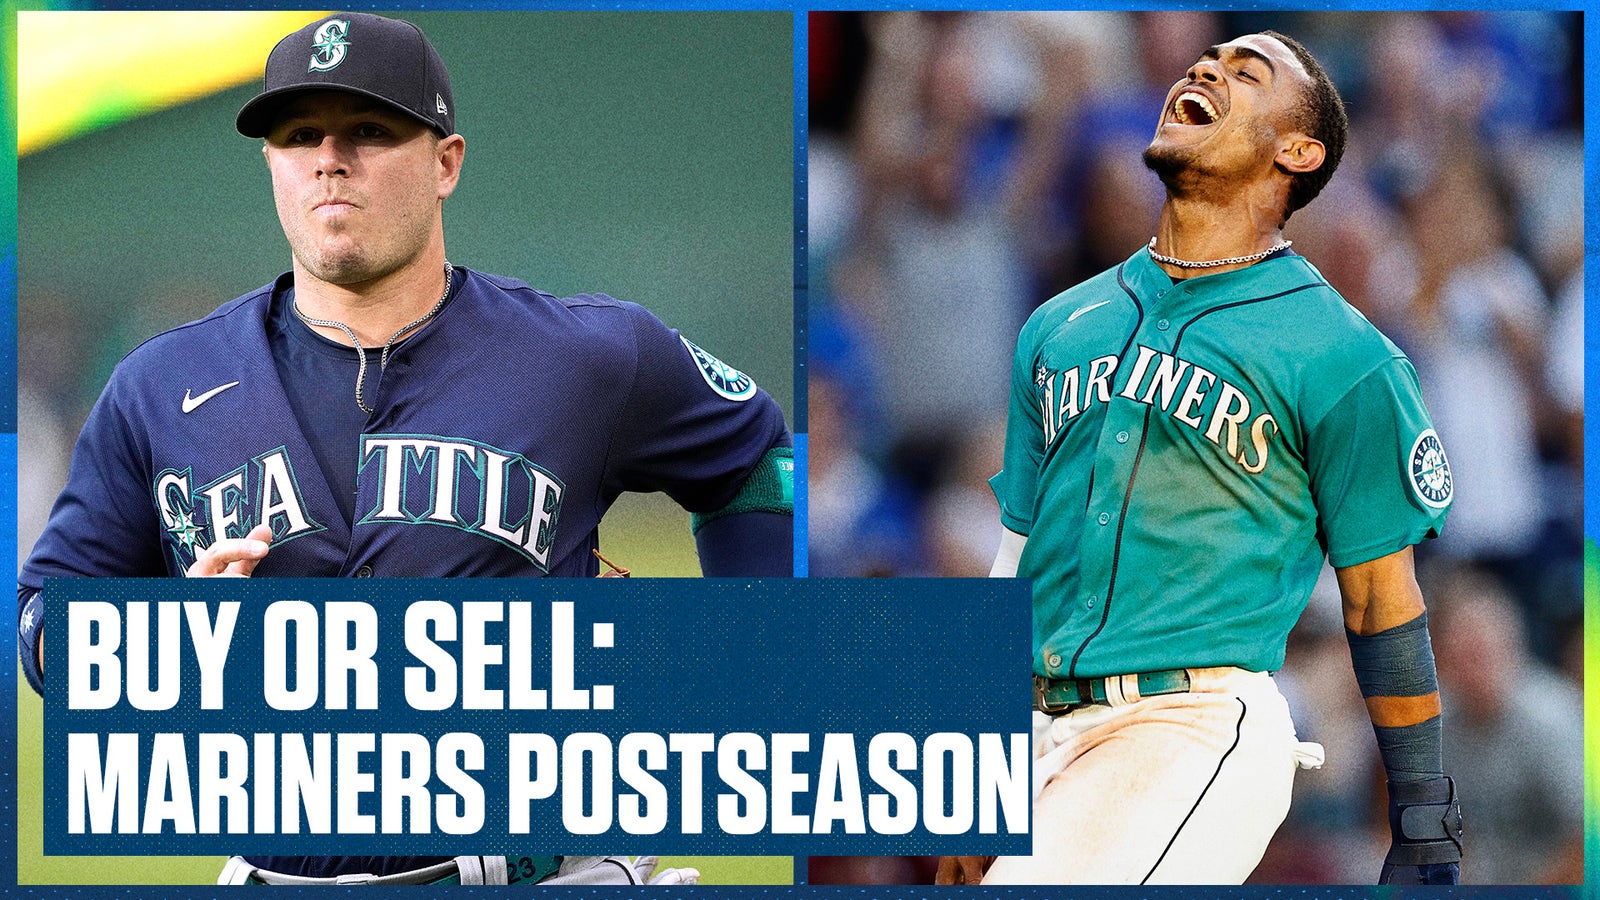 Will the Mariners finally snap the longest postseason drought in U.S. sports?